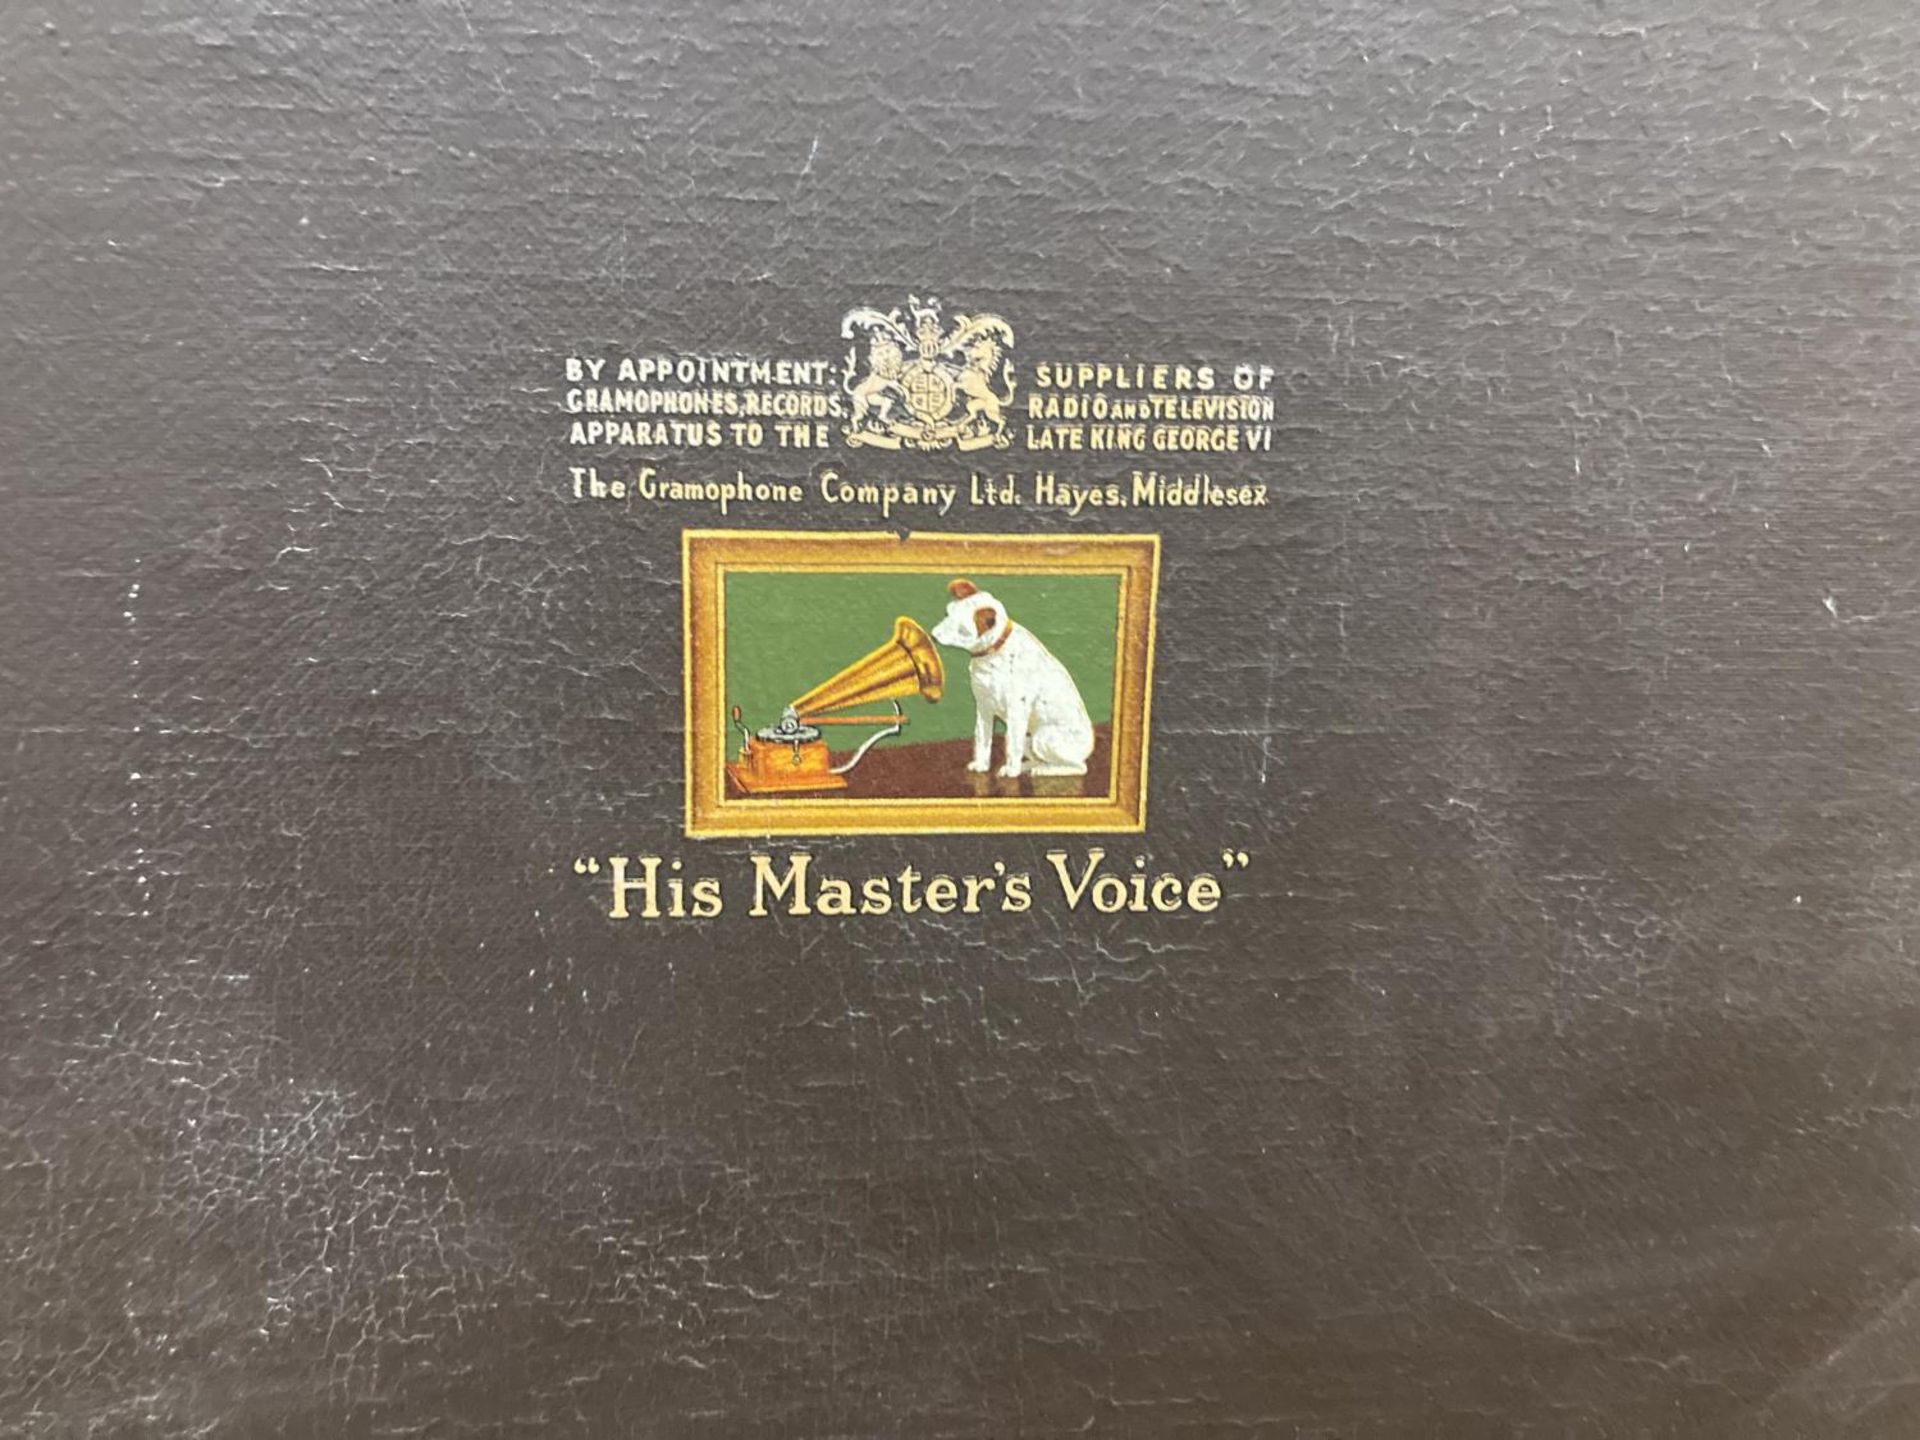 A HIS MASTER'S VOICE VINYL RECORD PLAYER IN A CARRY CASE - Image 3 of 3